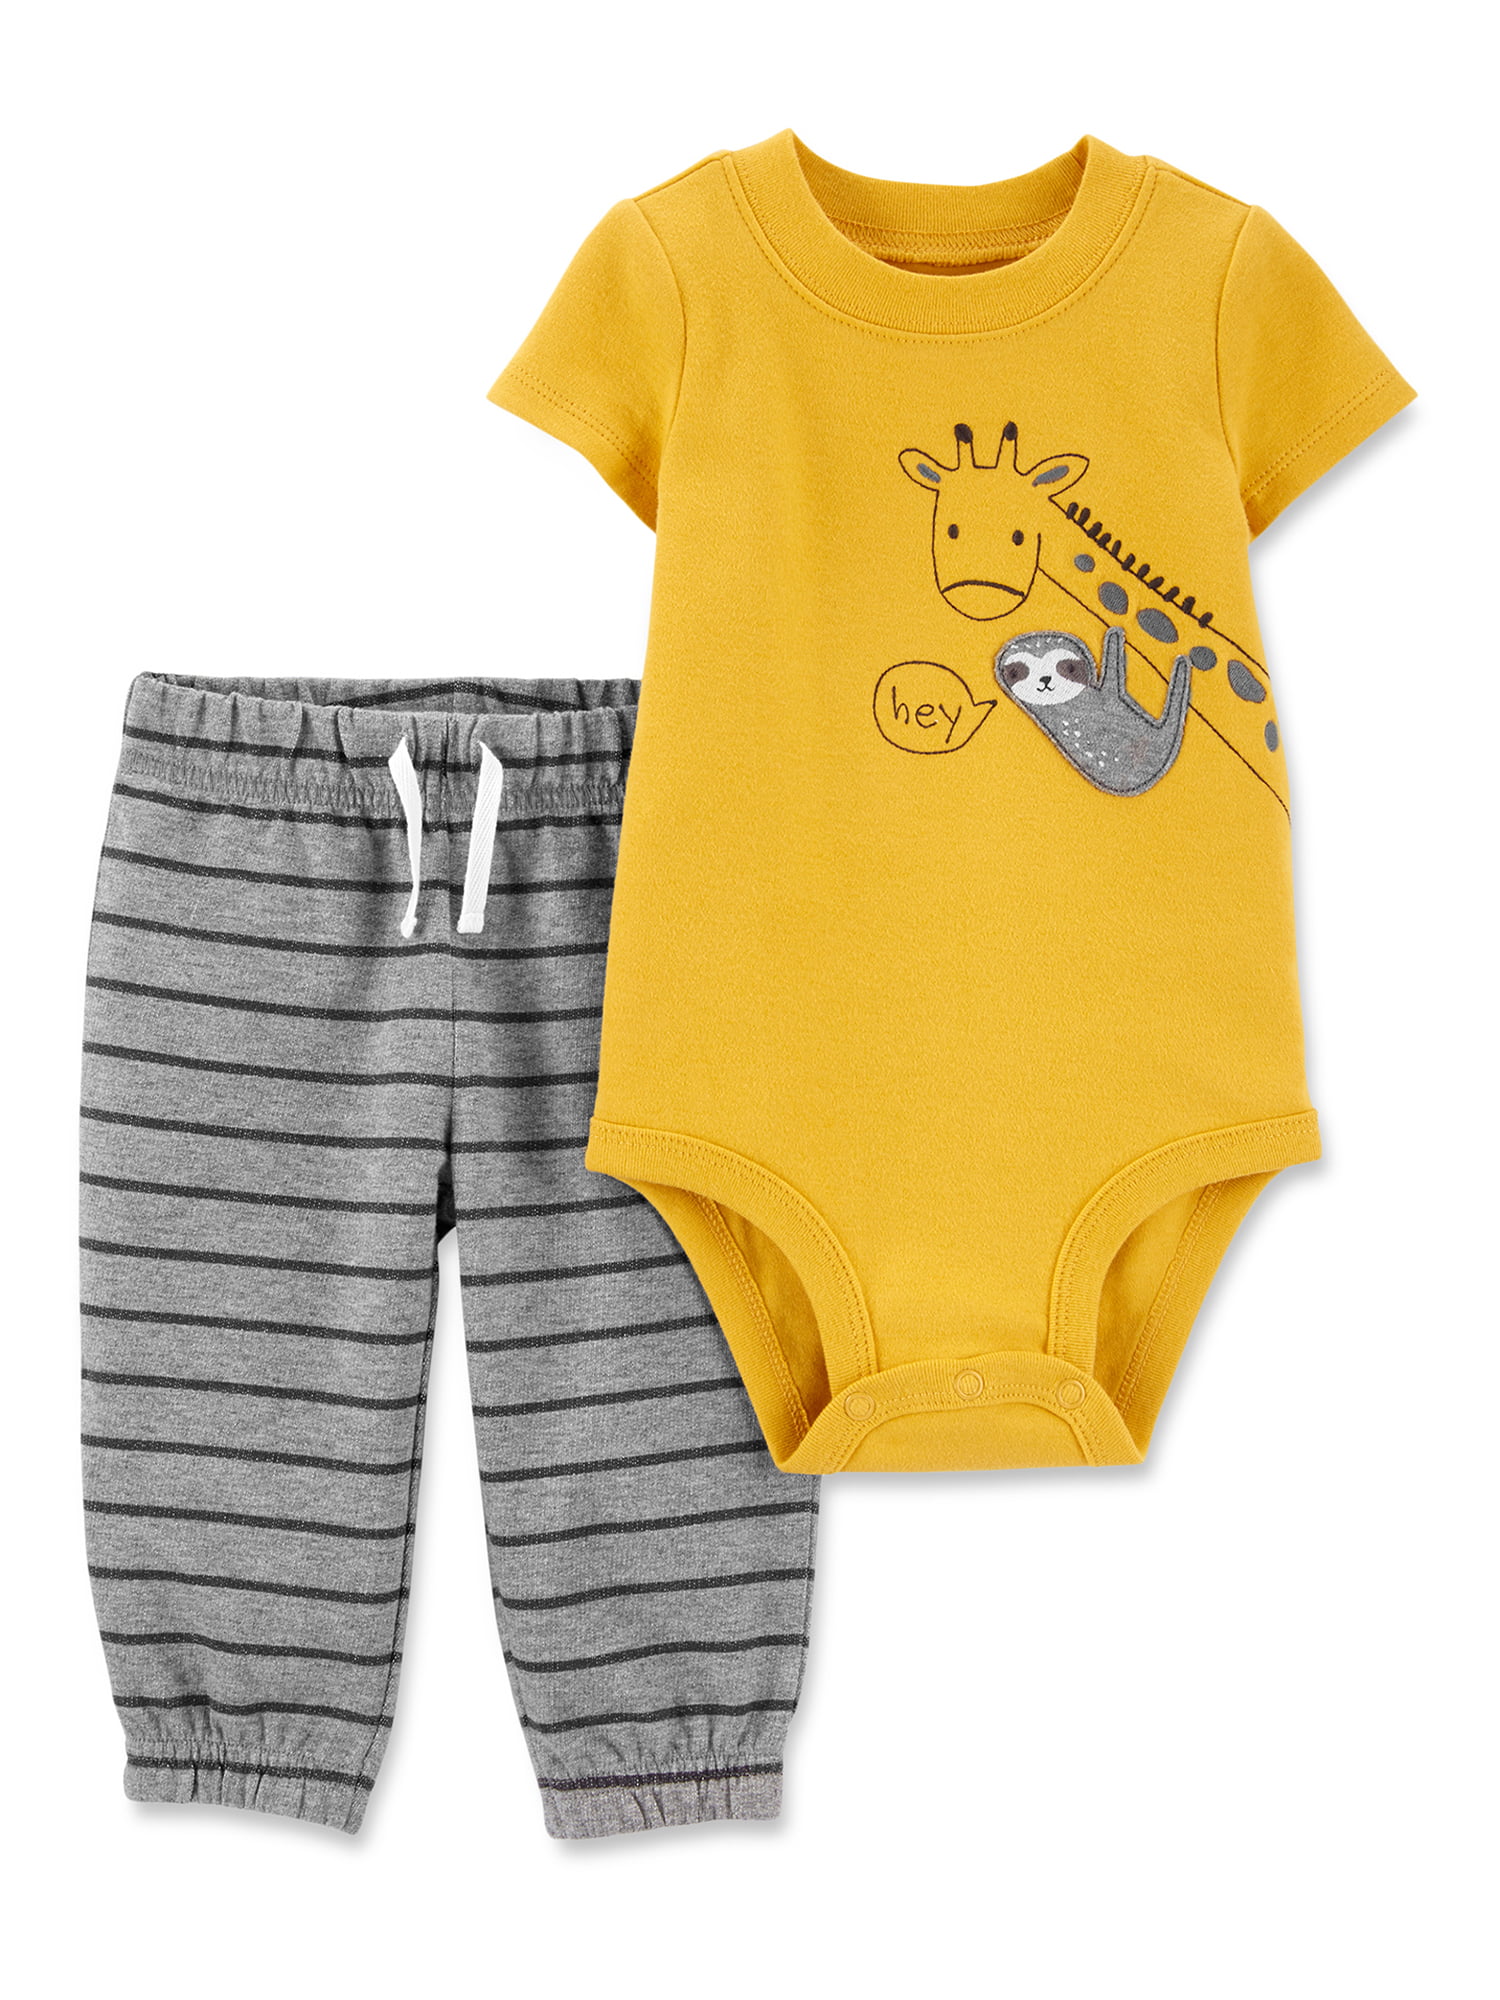 Carter's Baby Boys' 2 Piece Bodysuit & Pants Set 24 Months AWESOME LITTLE BRO 